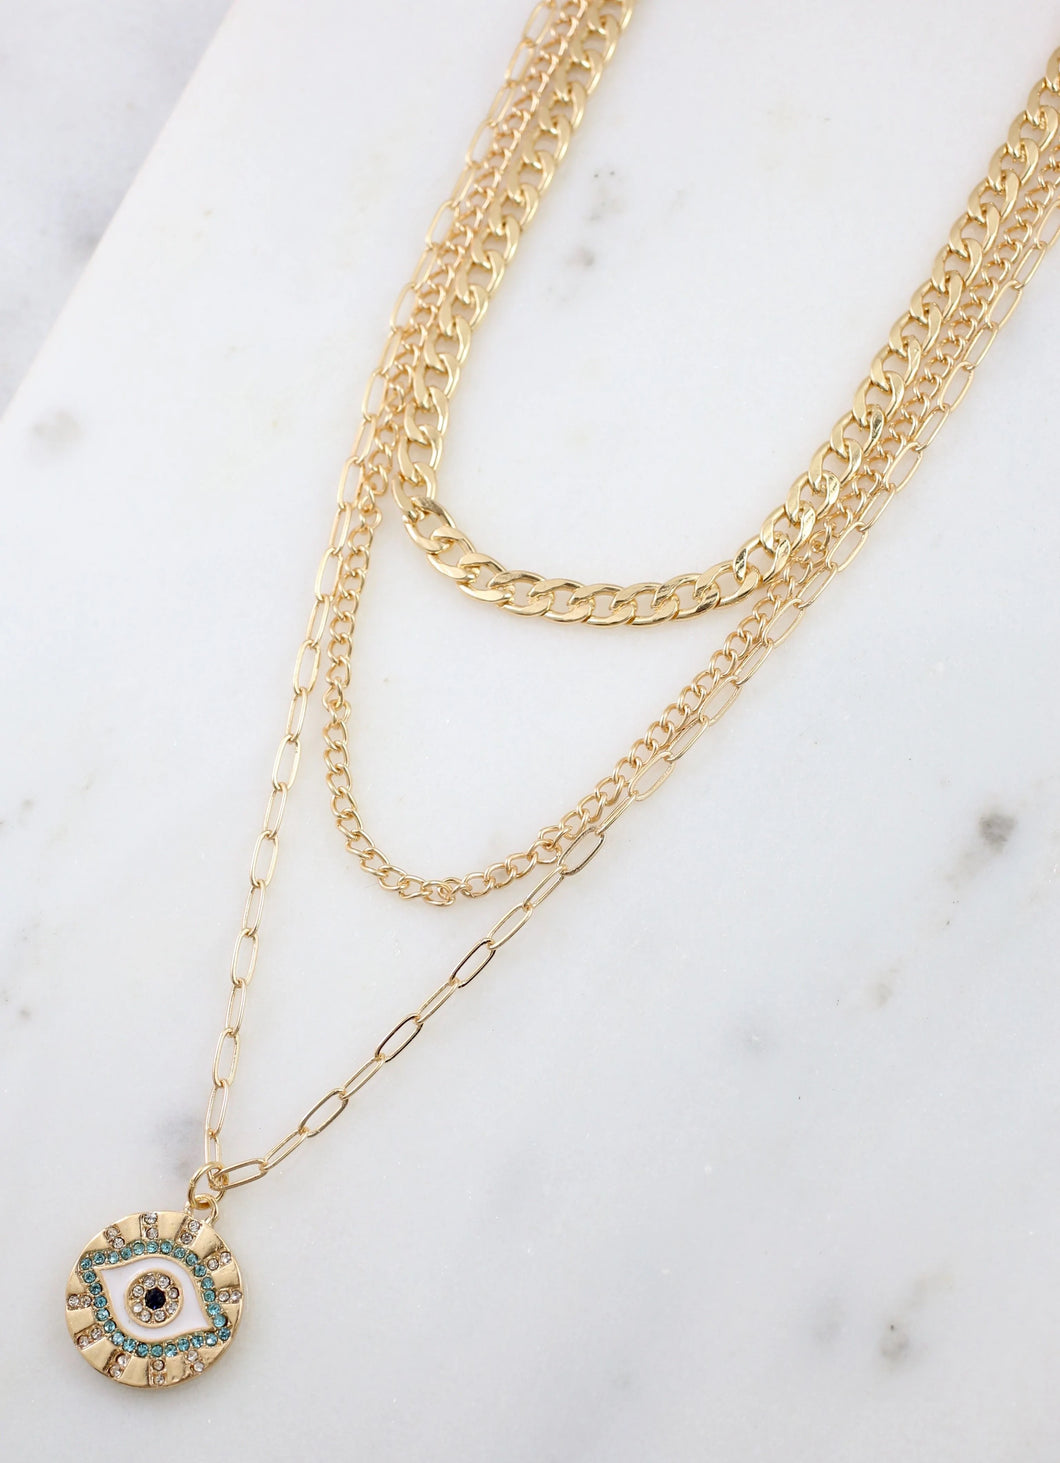 Layered Gold necklace with Eye pendant